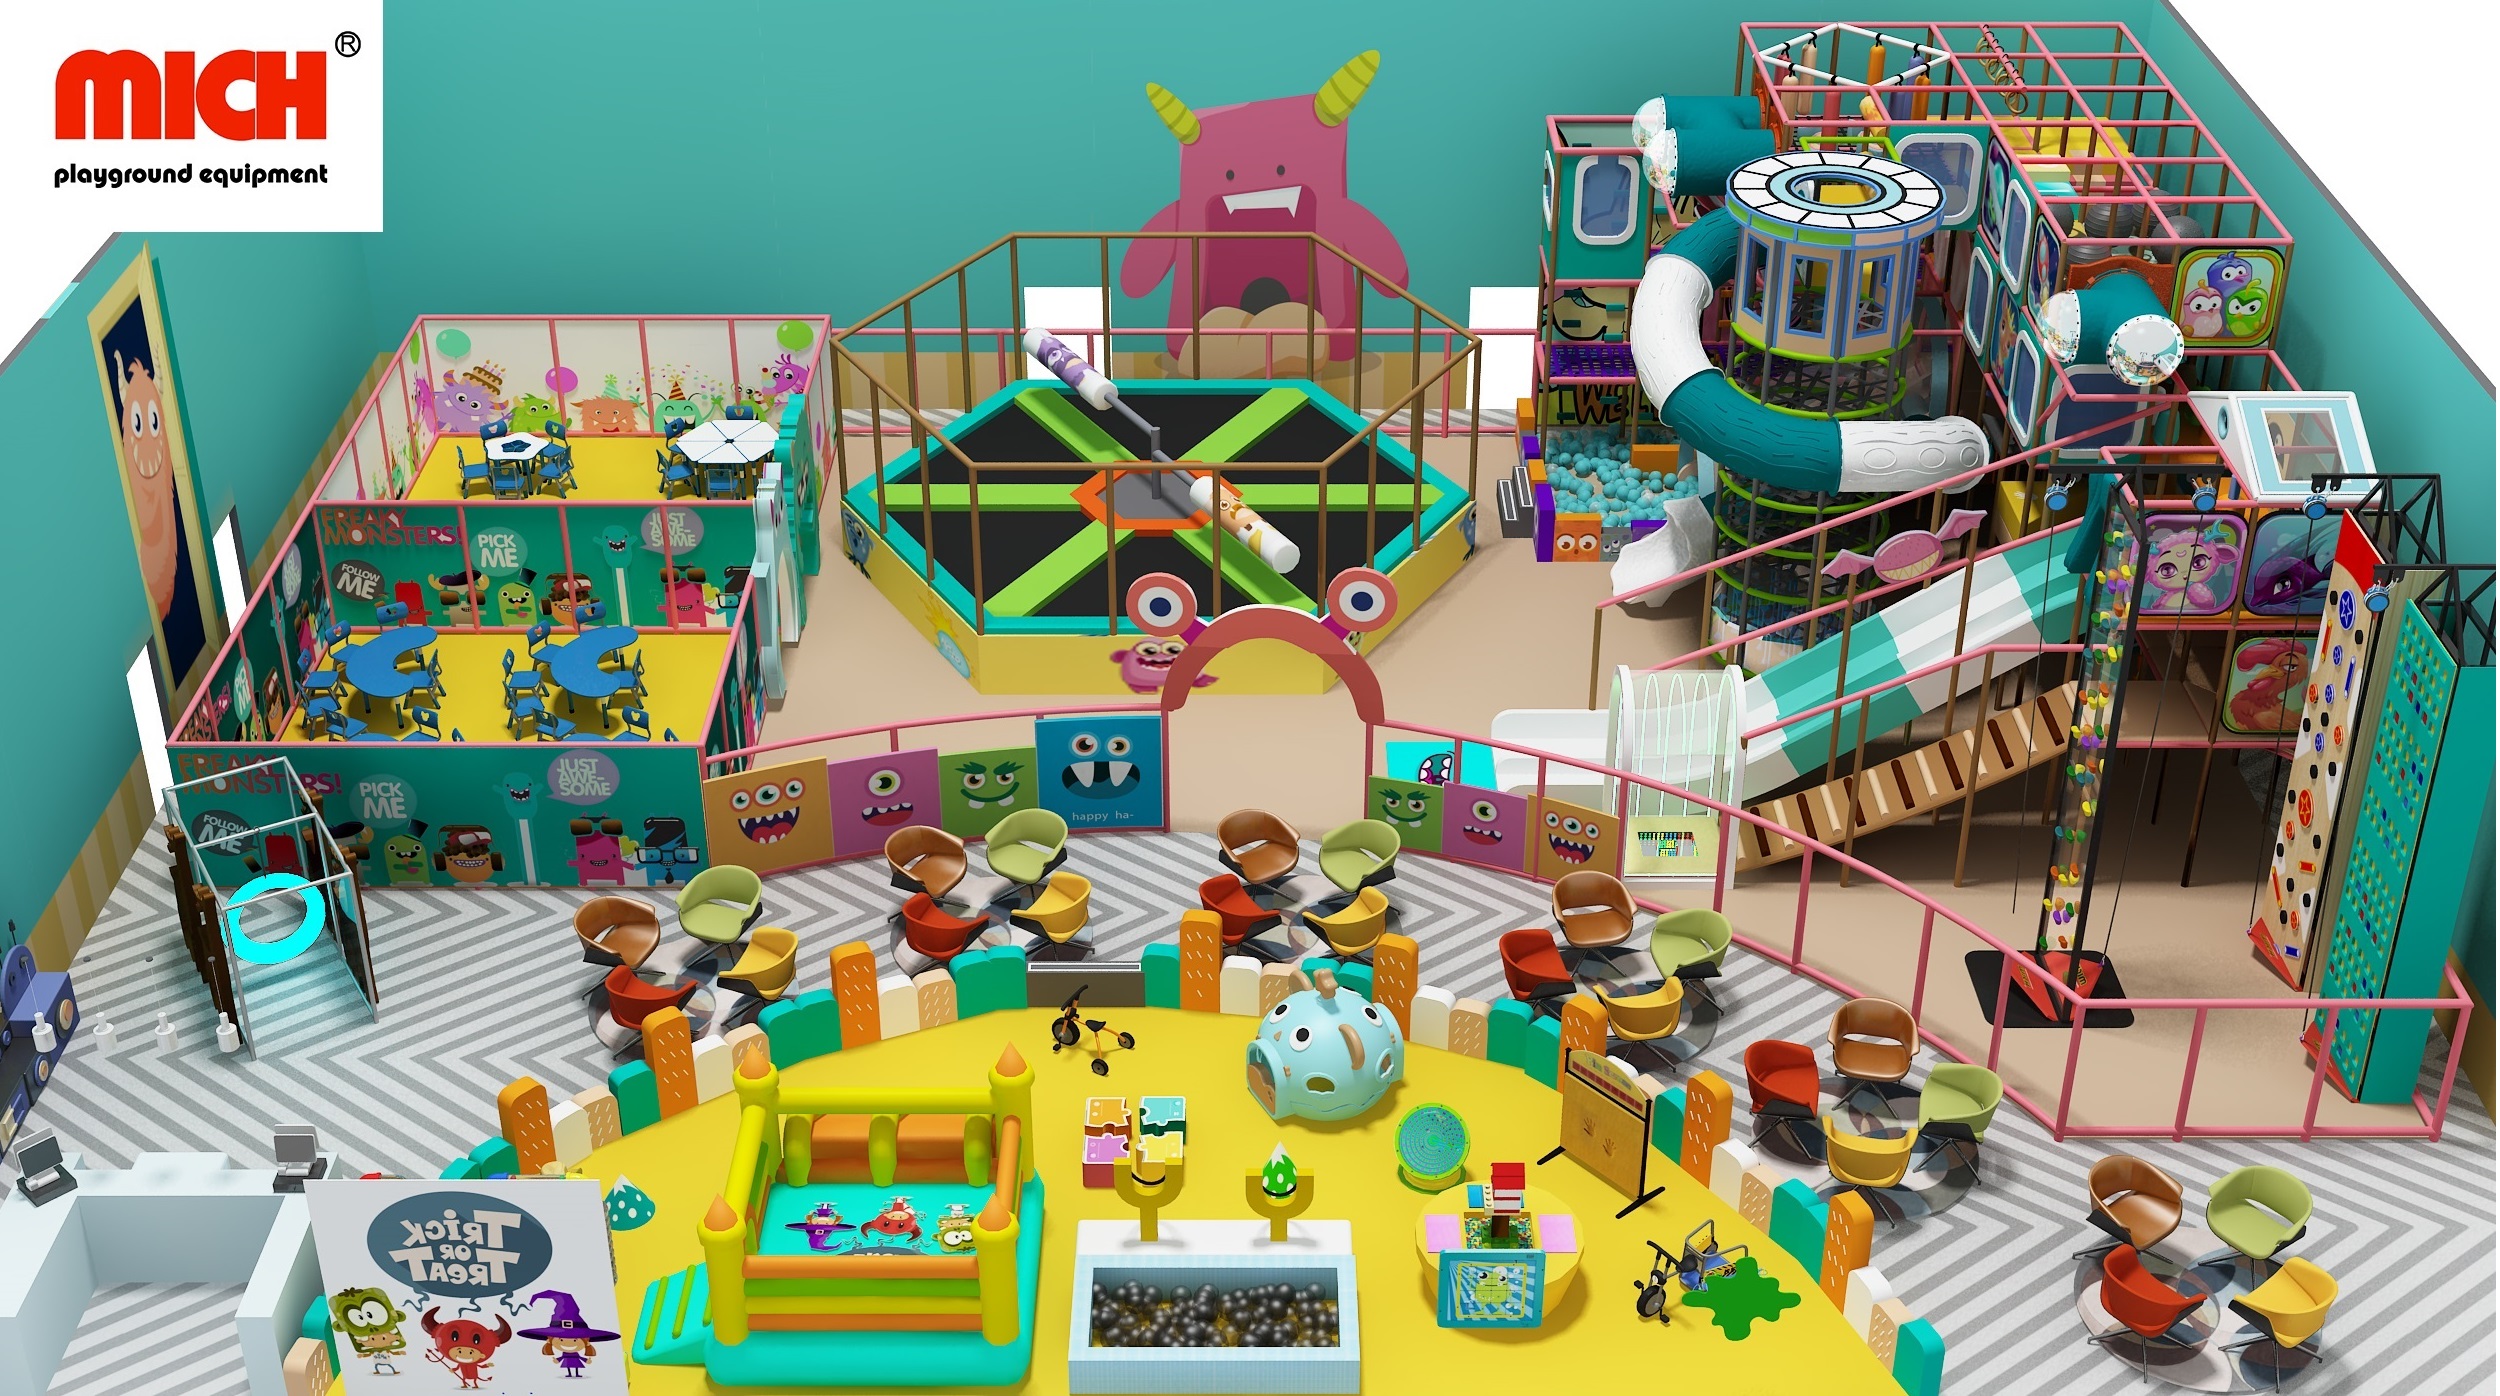 What is the charm of indoor playground equipment?